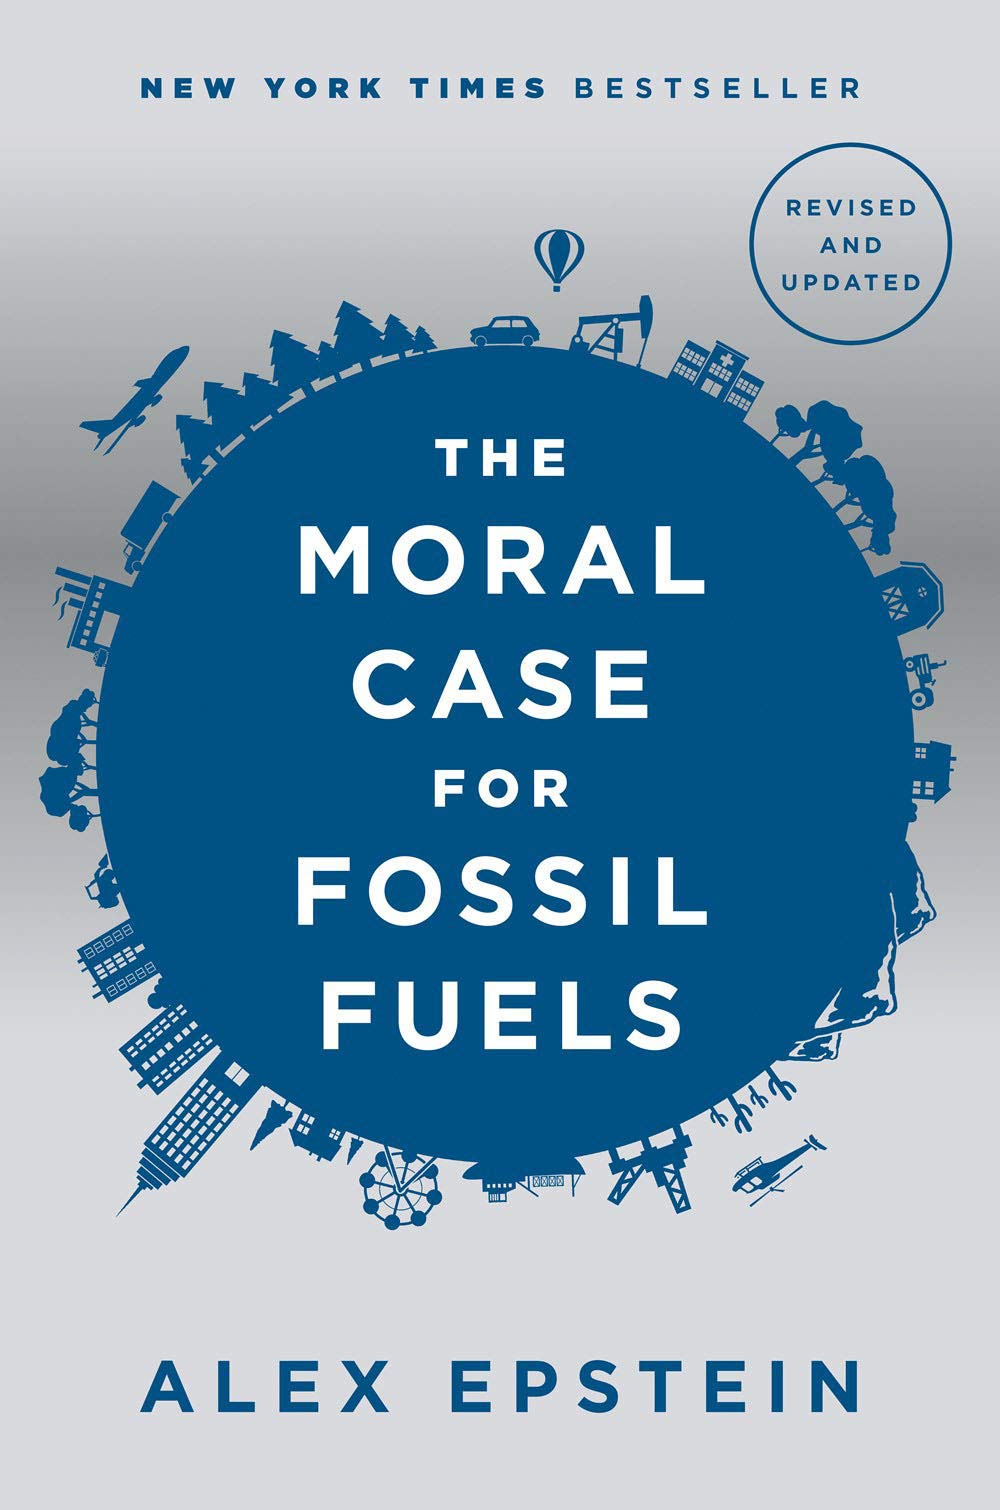 The Moral Case for Fossil Fuels by Alex Epstein